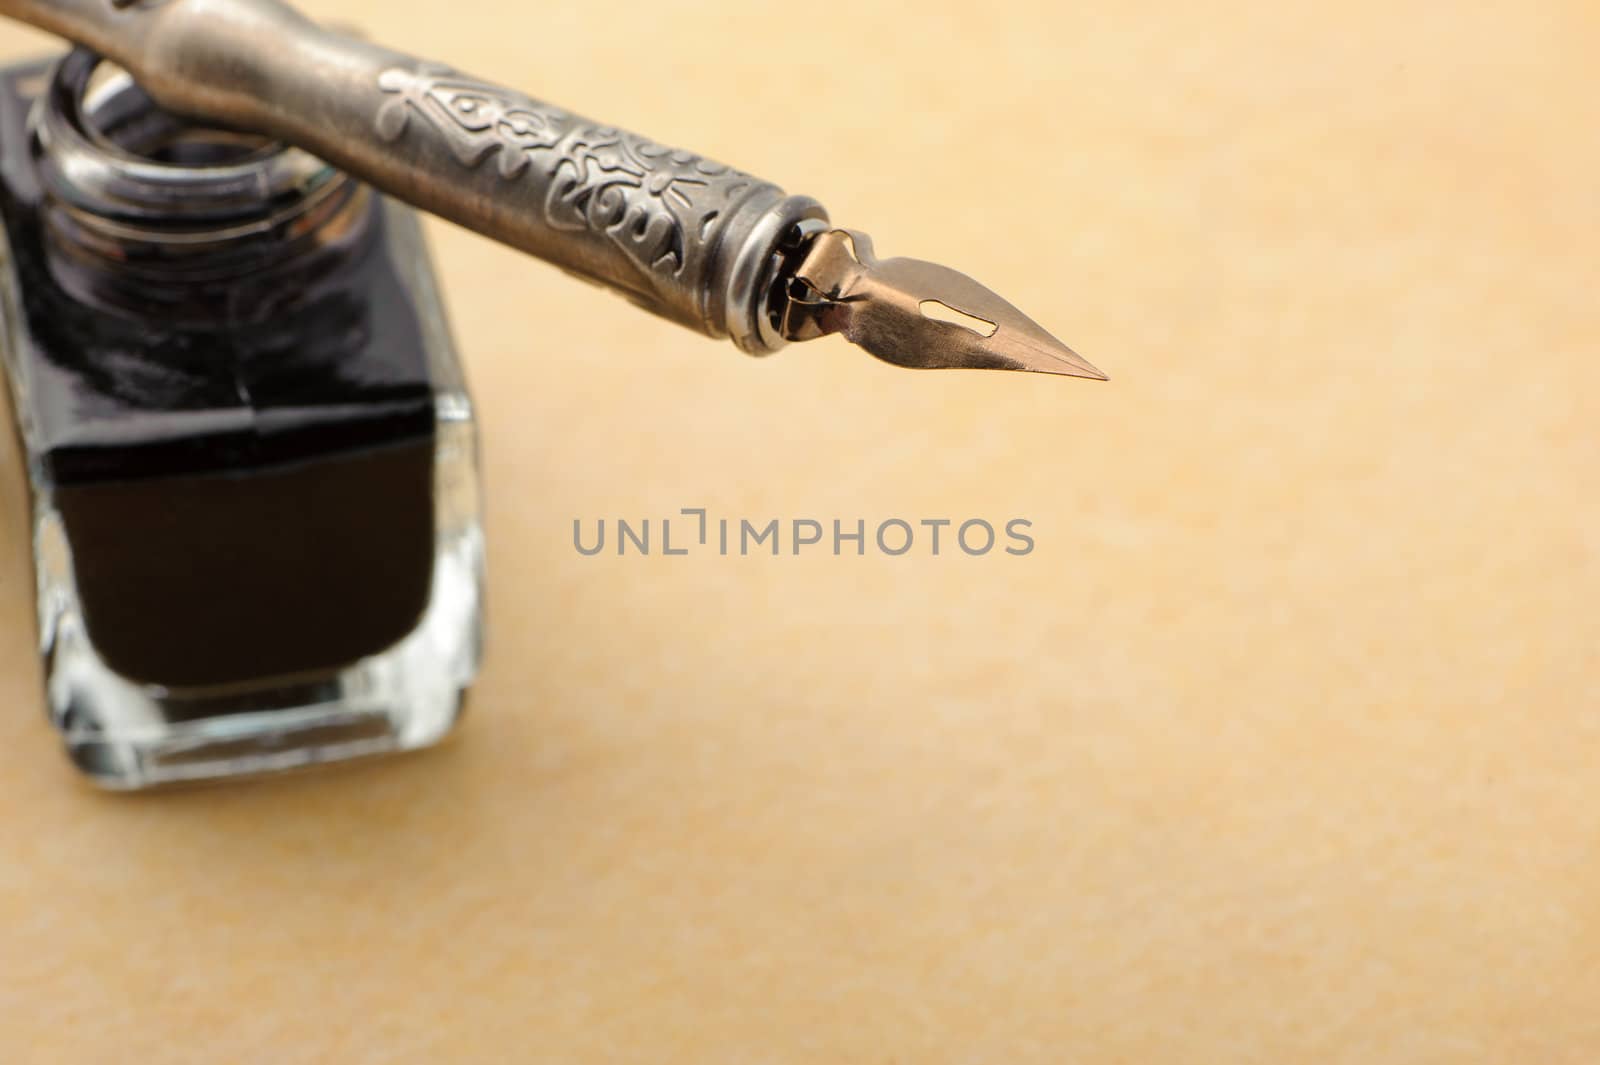 Feather quill and inkwell on an old paper. Photo closeup